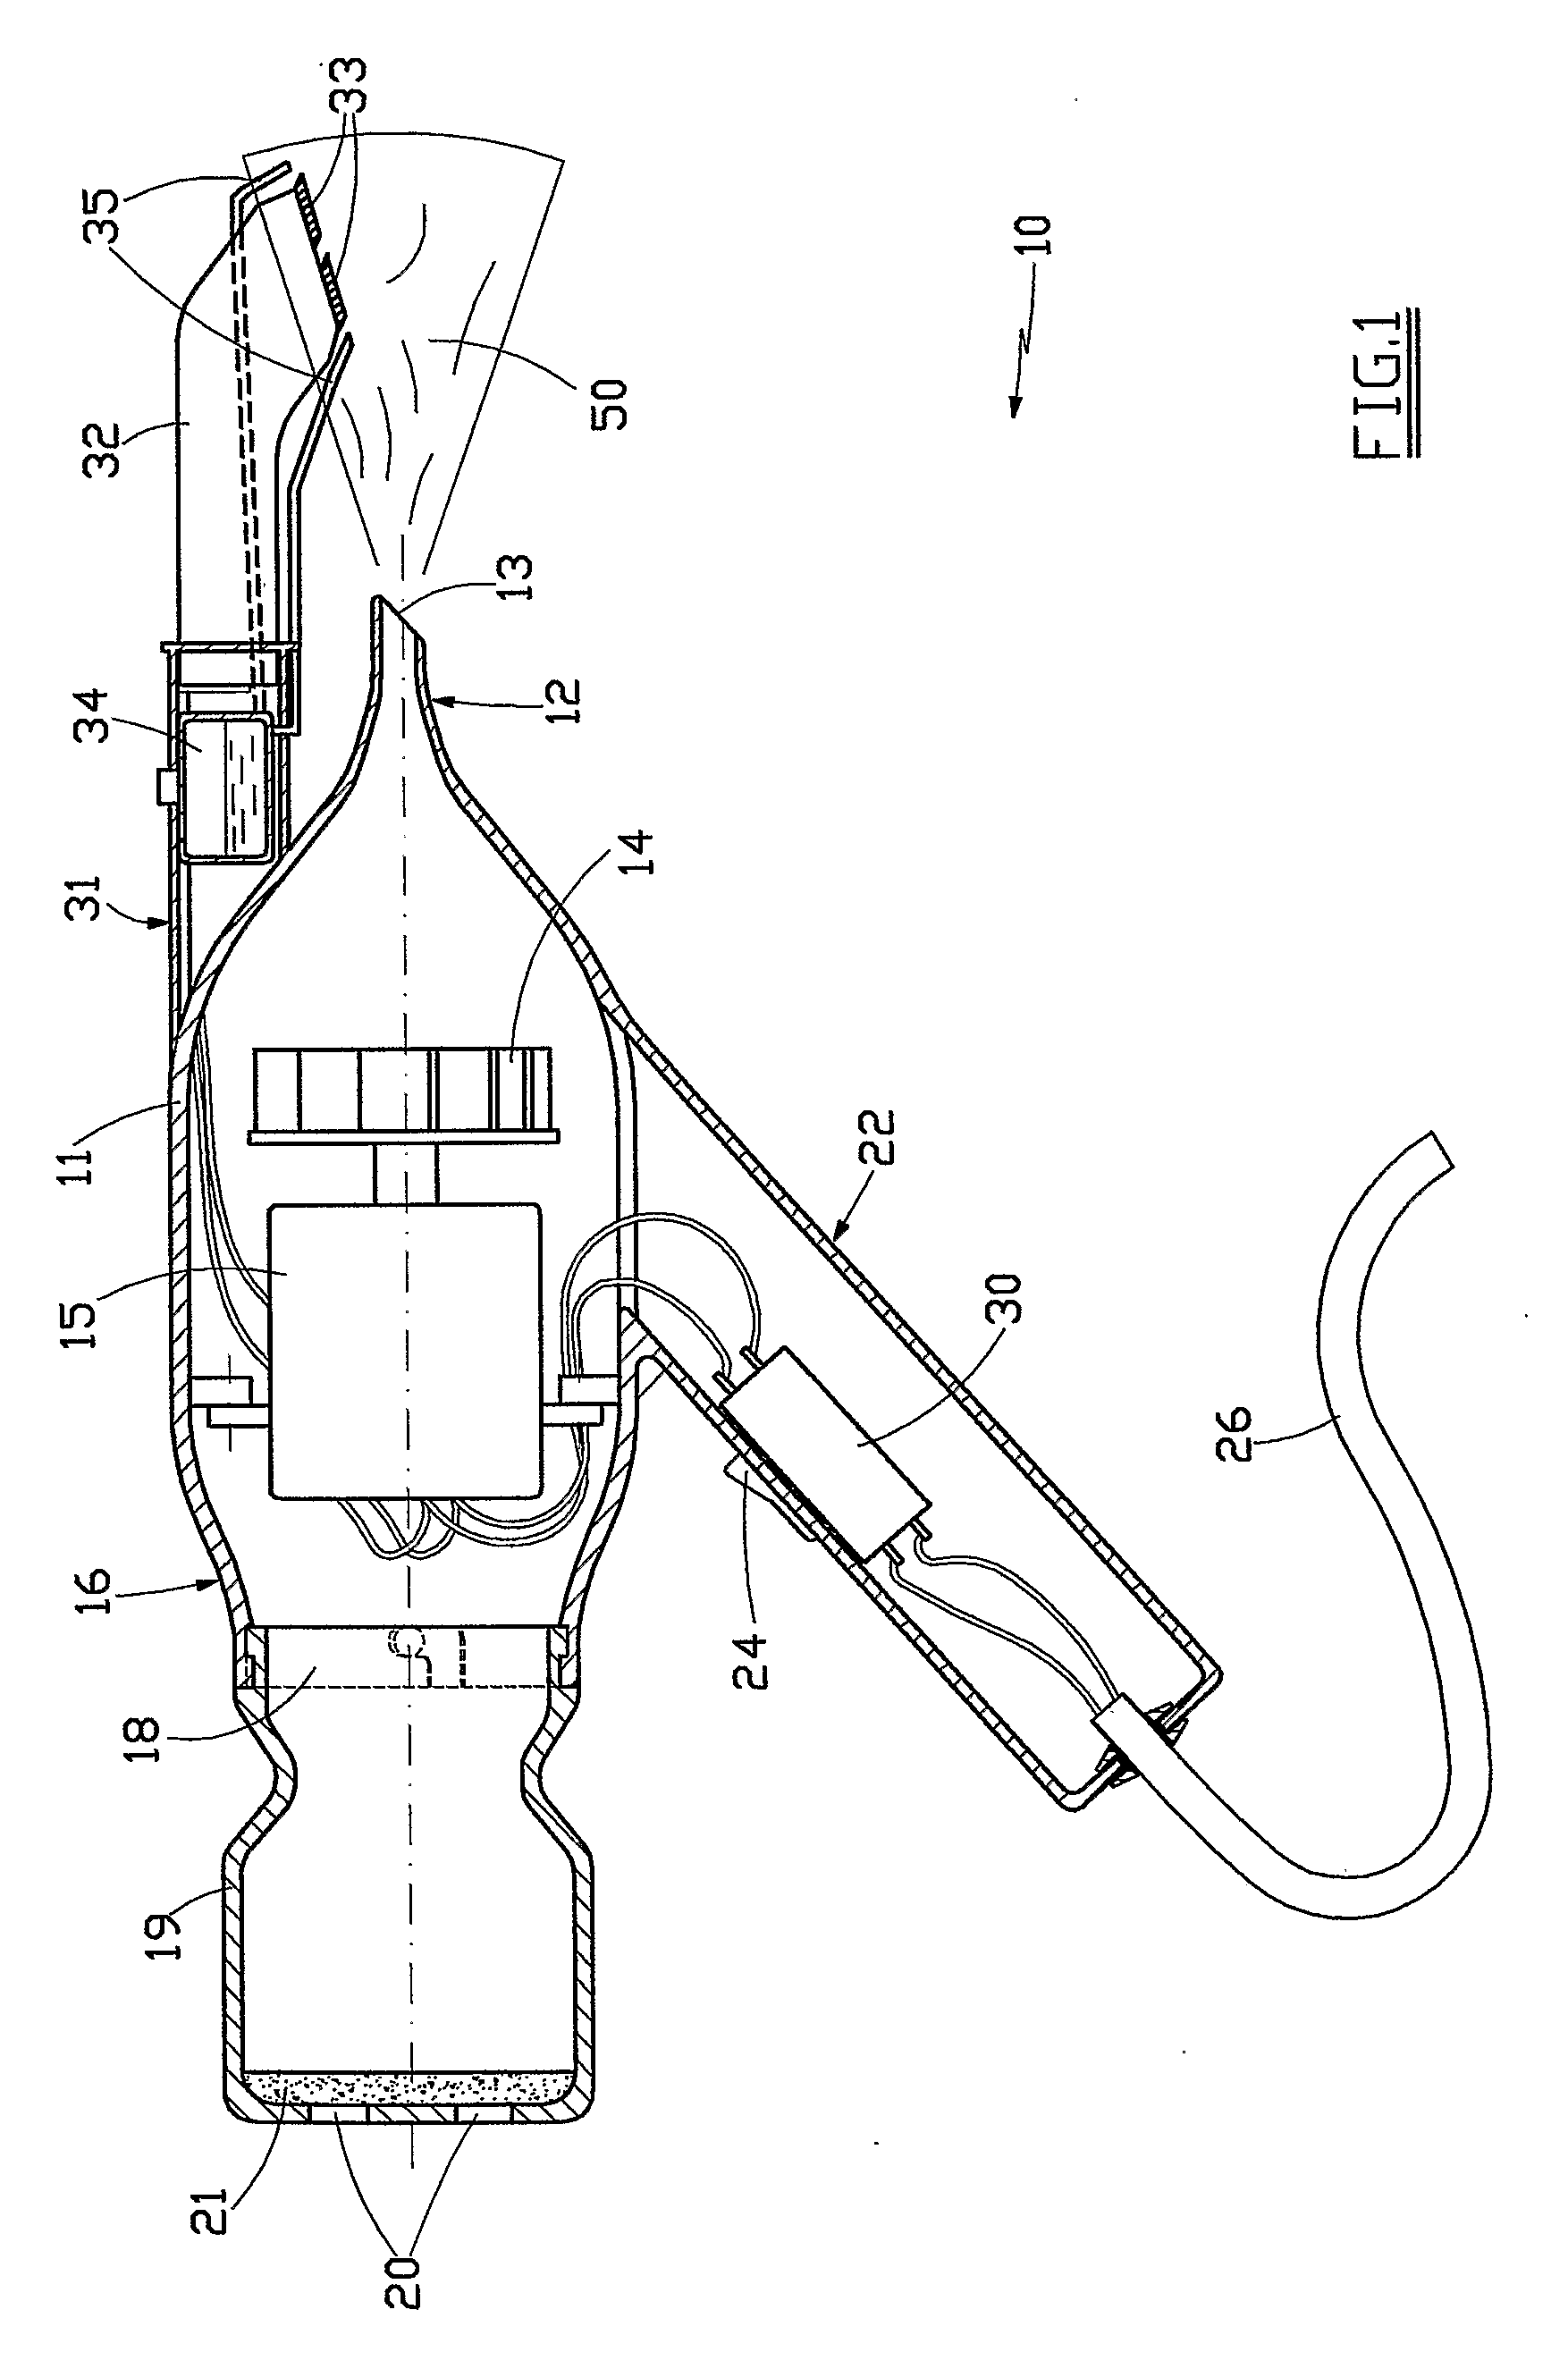 Apparatus For Effecting Hair-Removal and Cleaning on Body Parts in Sanitary or Medical Ambits